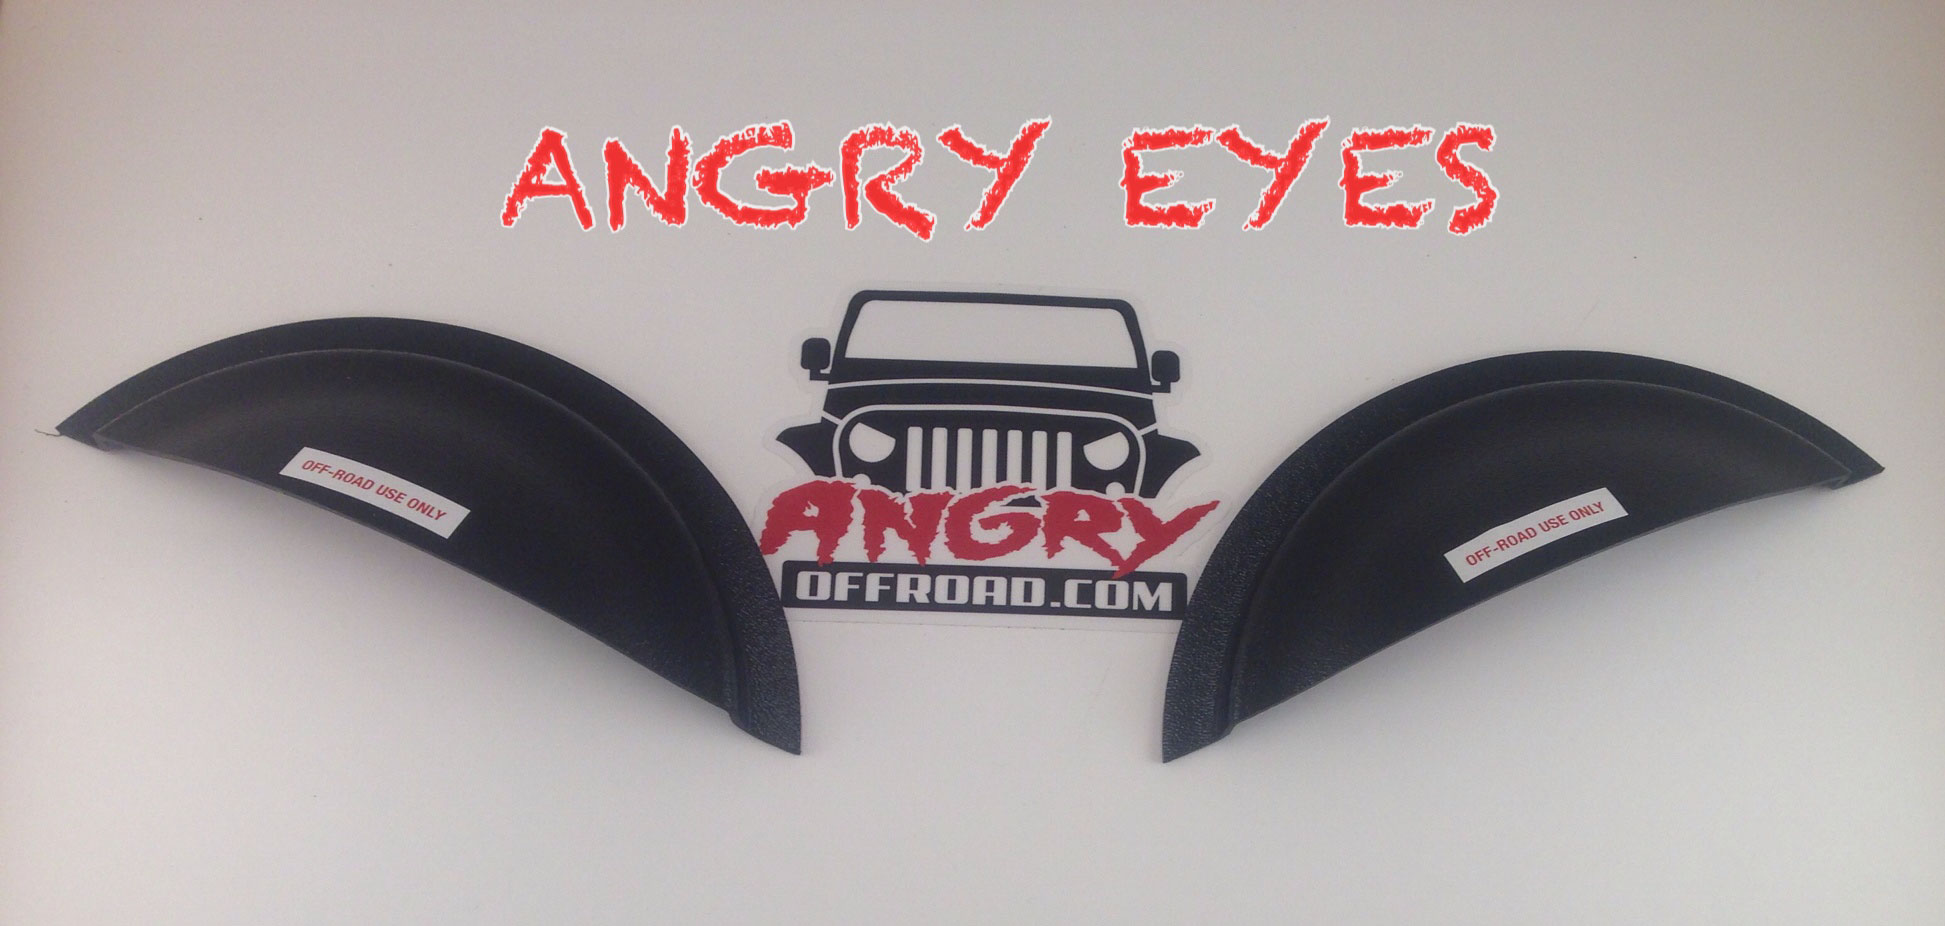 Angry Eyes - Jeep Headlight Cover - Angry Eyes Jeep Headlight Covers